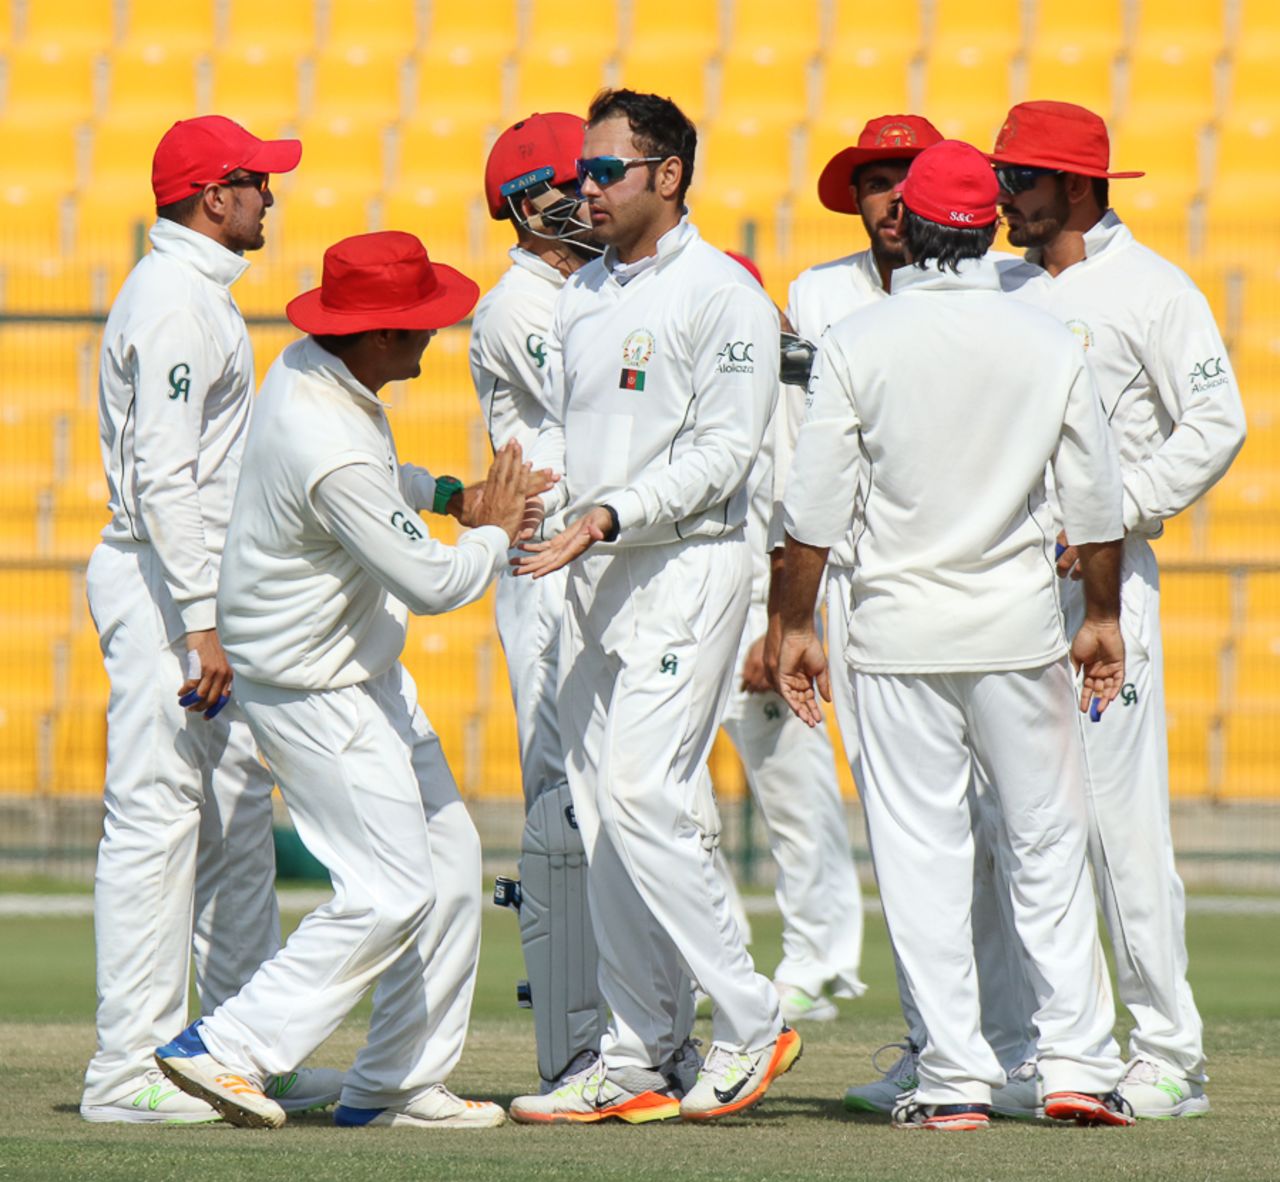 Mohammad Nabi gets congratulated for taking a wicket, UAE v Afghanistan, 2015-17 Intercontinental Cup, 4th day, Abu Dhabi, December 2, 2017